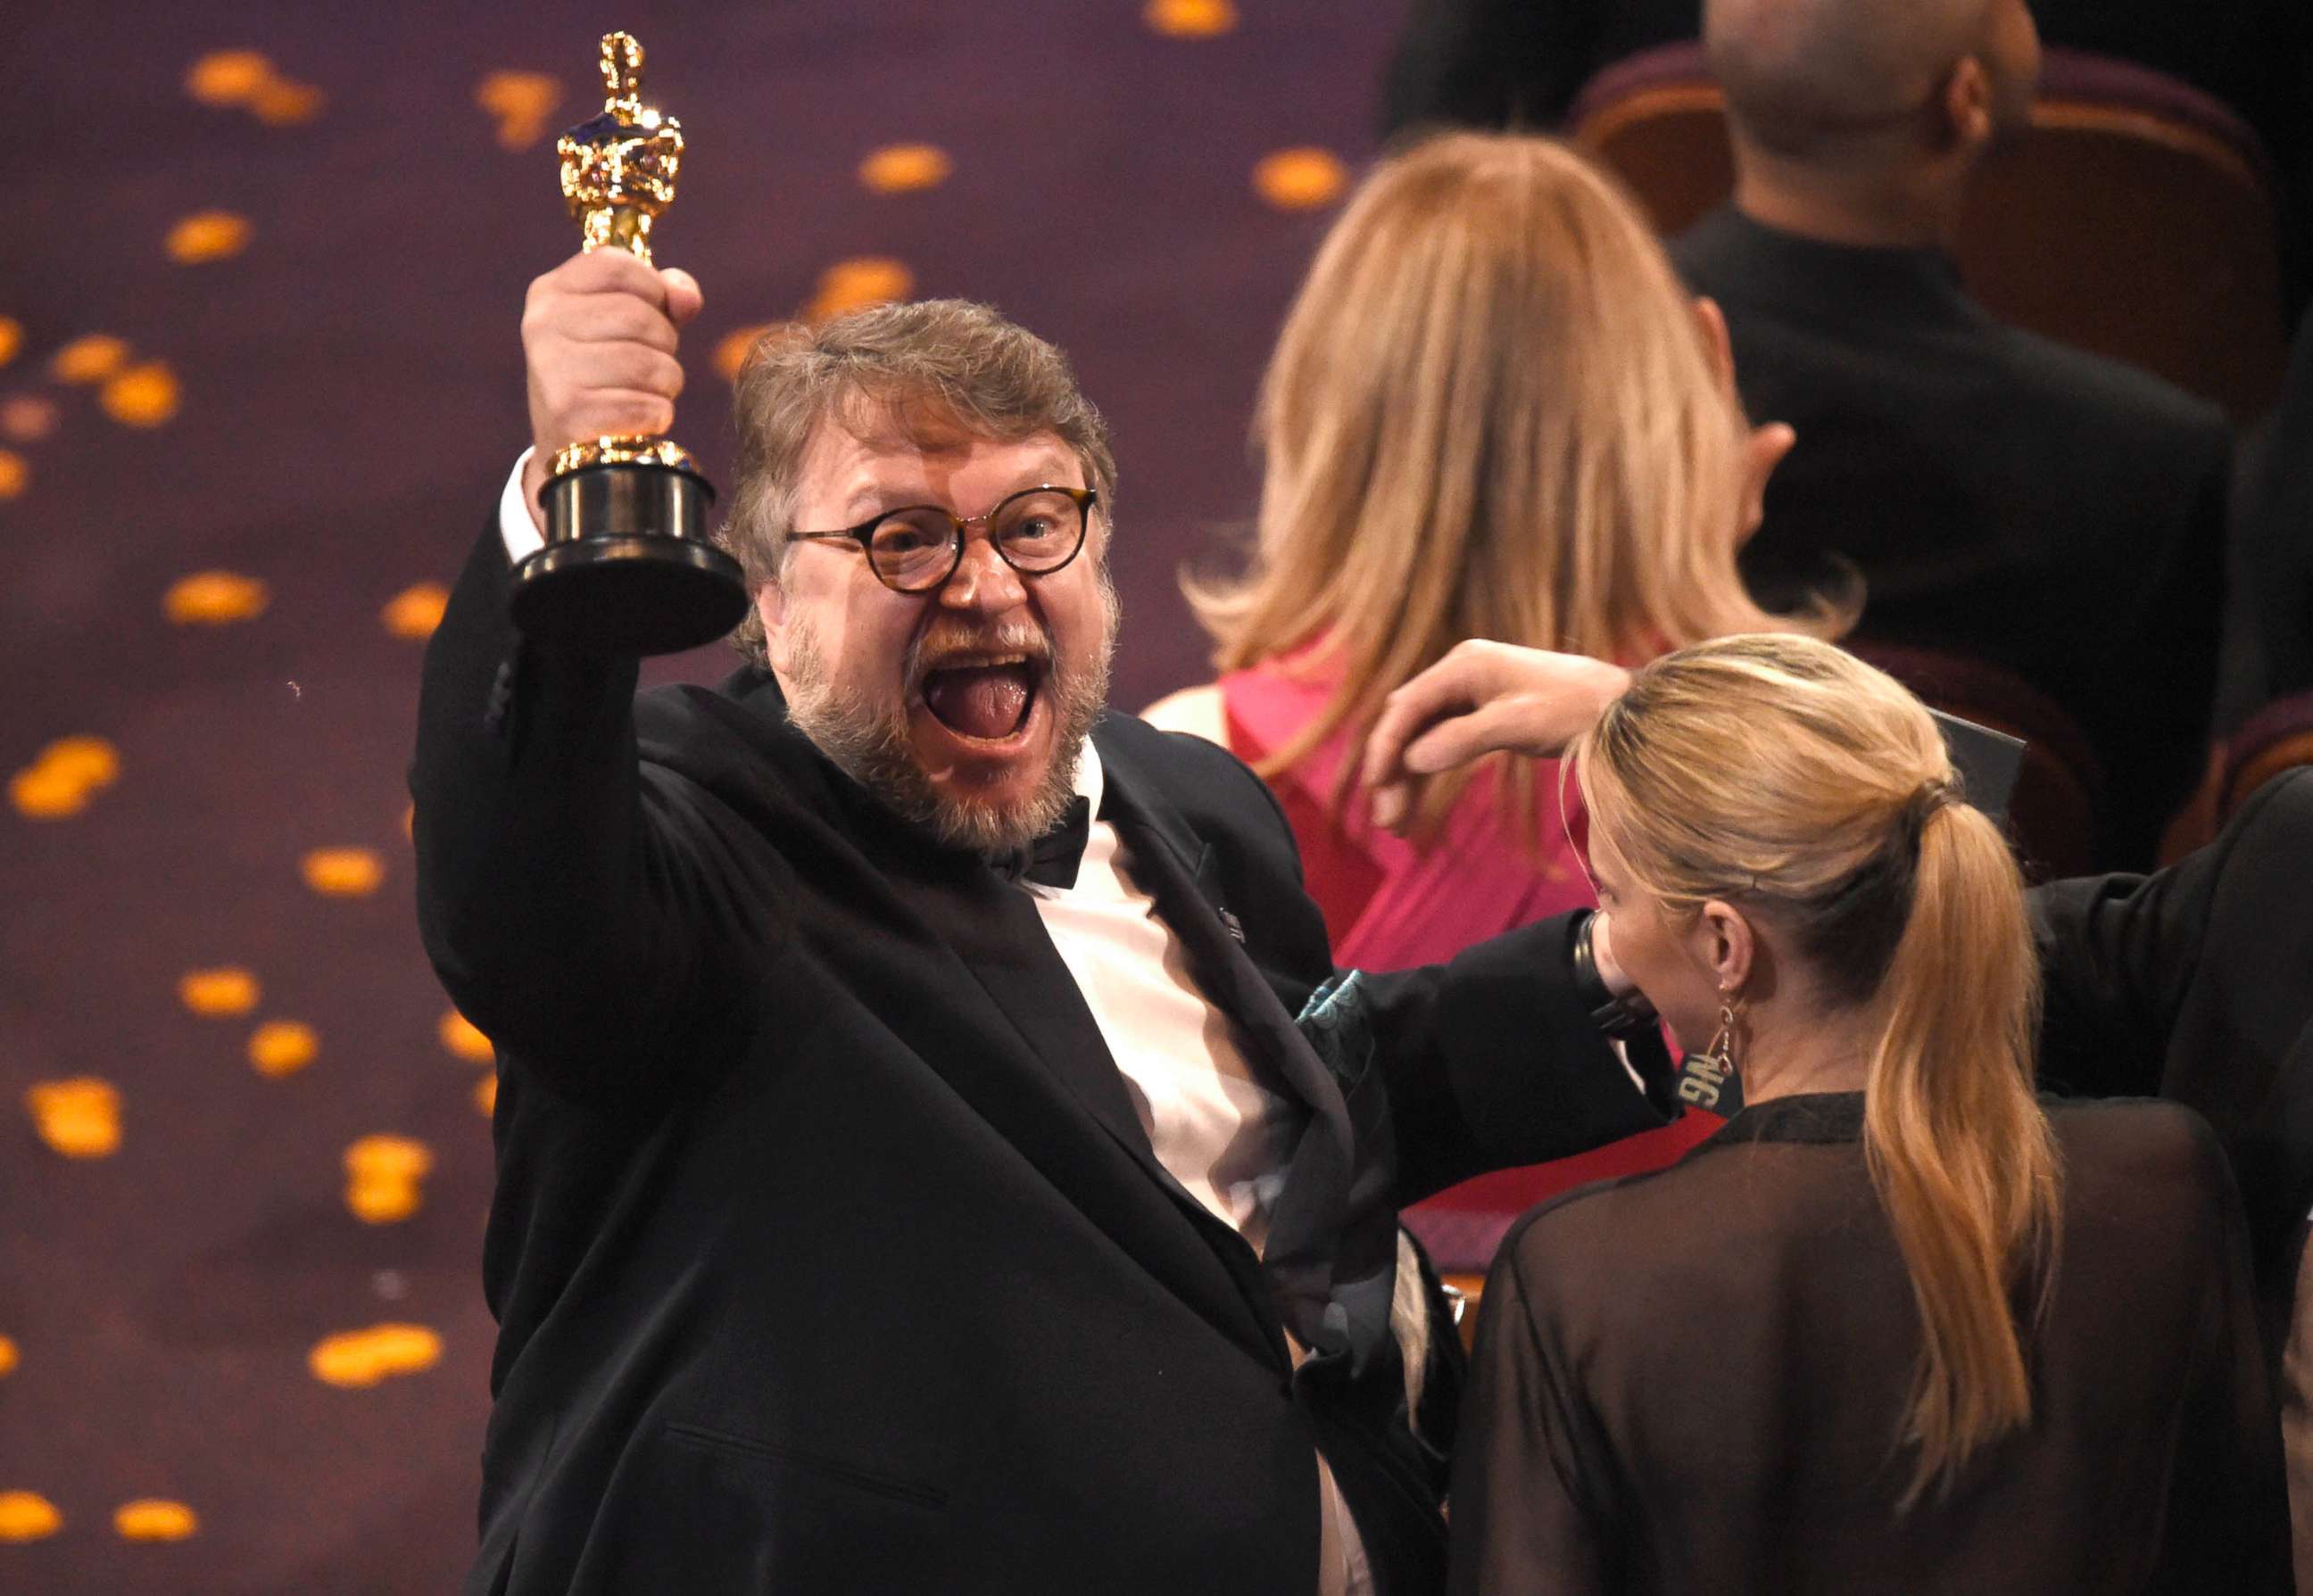 PHOTO: Guillermo del Toro, winner of the award for best director for "The Shape of Water" celebrates in the audience at the Oscars, March 4, 2018, at the Dolby Theatre in Los Angeles.